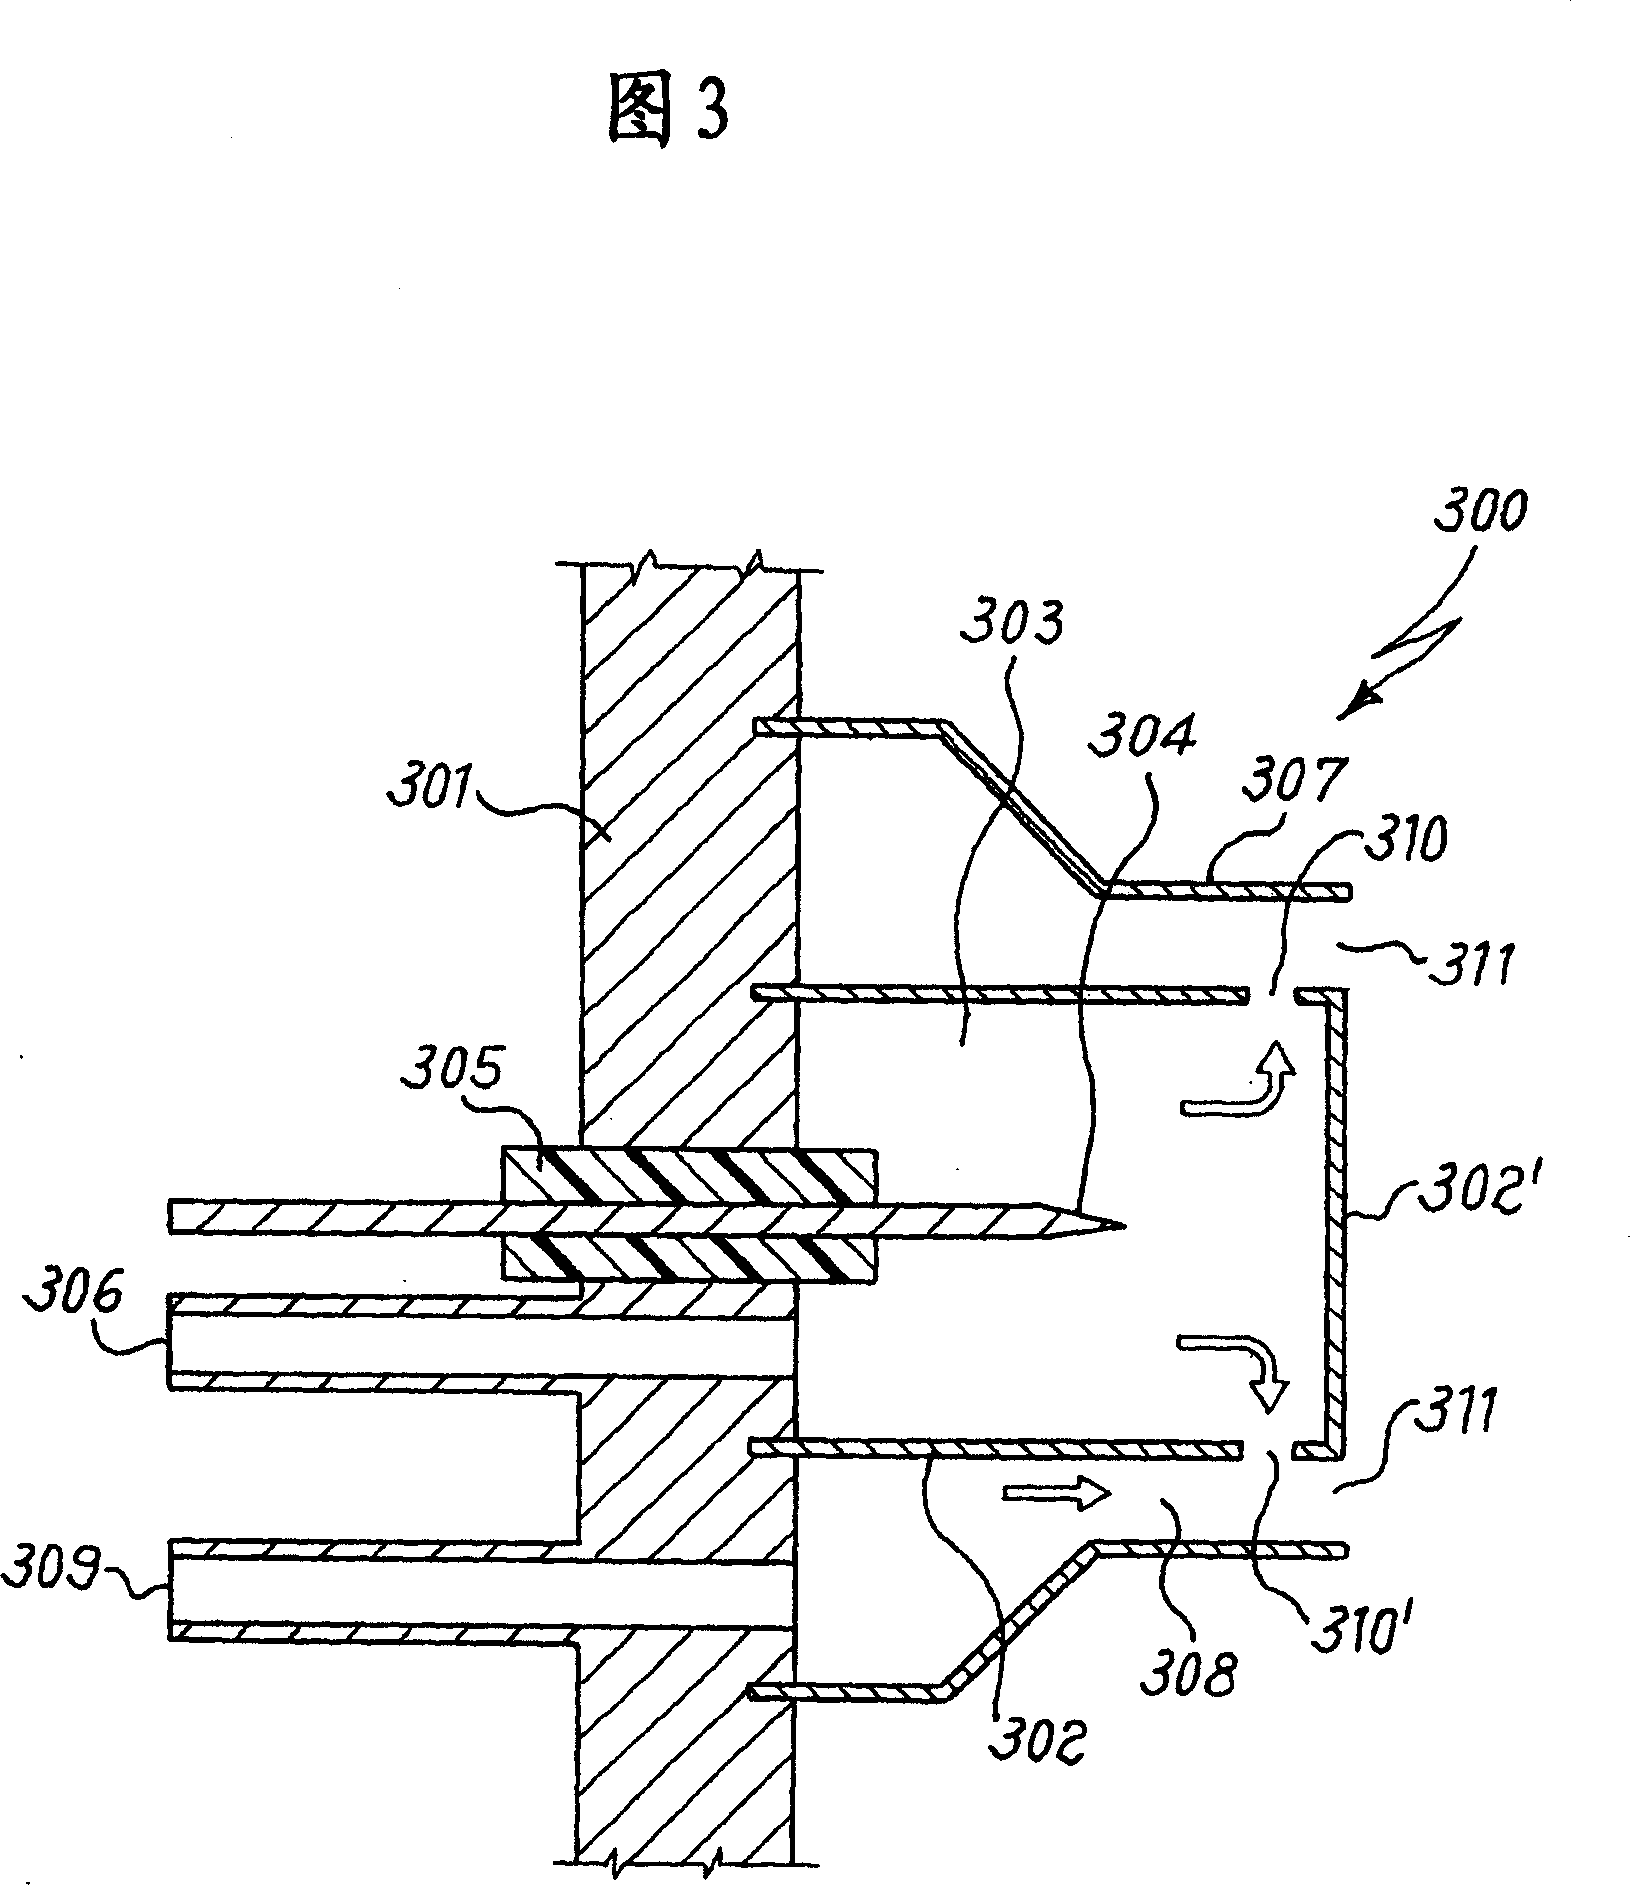 Ion mobility spectrometer comprising a corona discharge ionization element